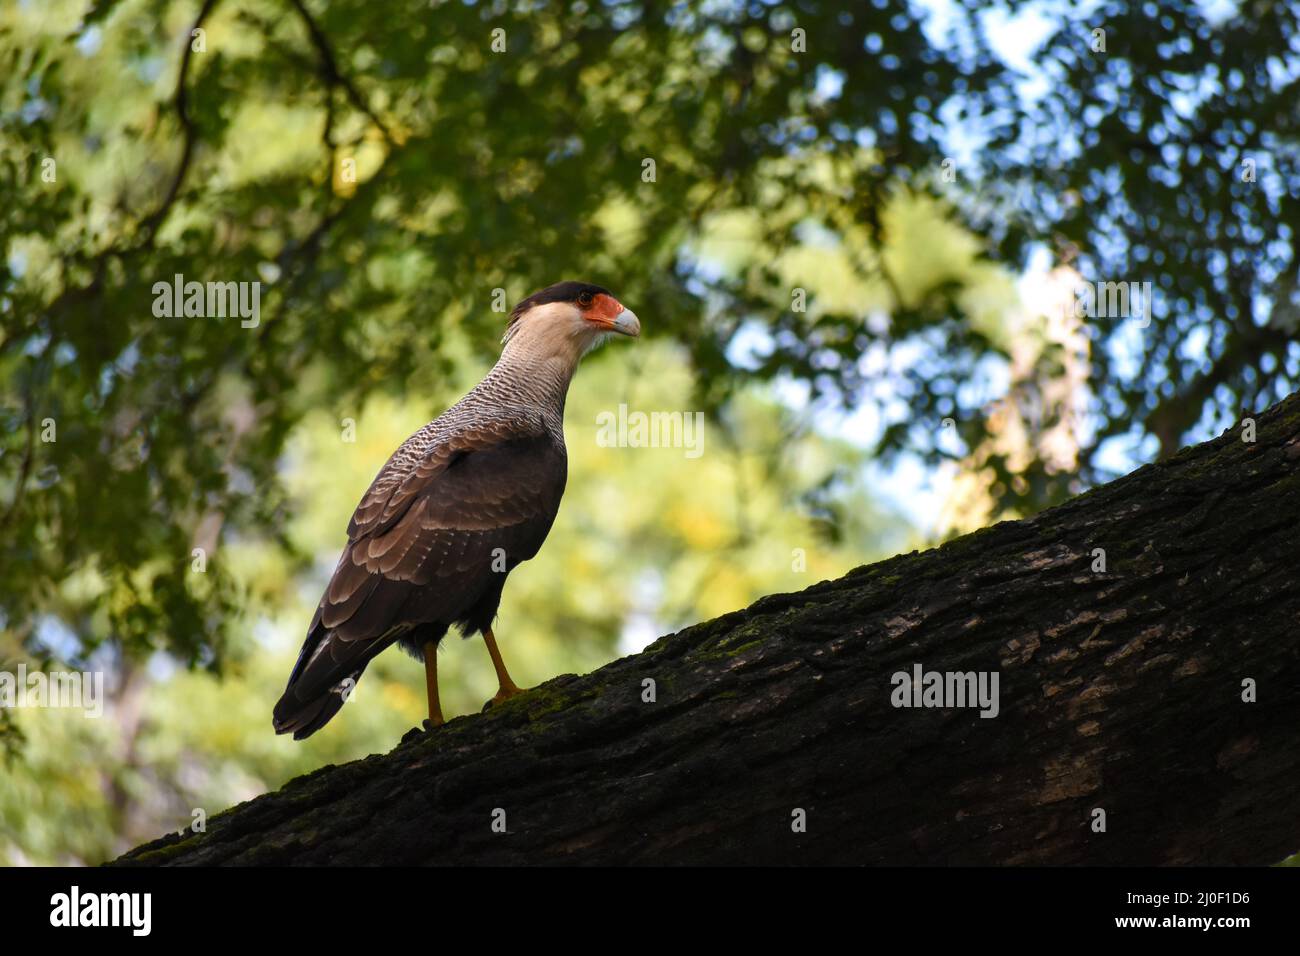 Southern Caracara (Caracara plancus) in a tree, seen in City of Buenos Aires, Argentina Stock Photo